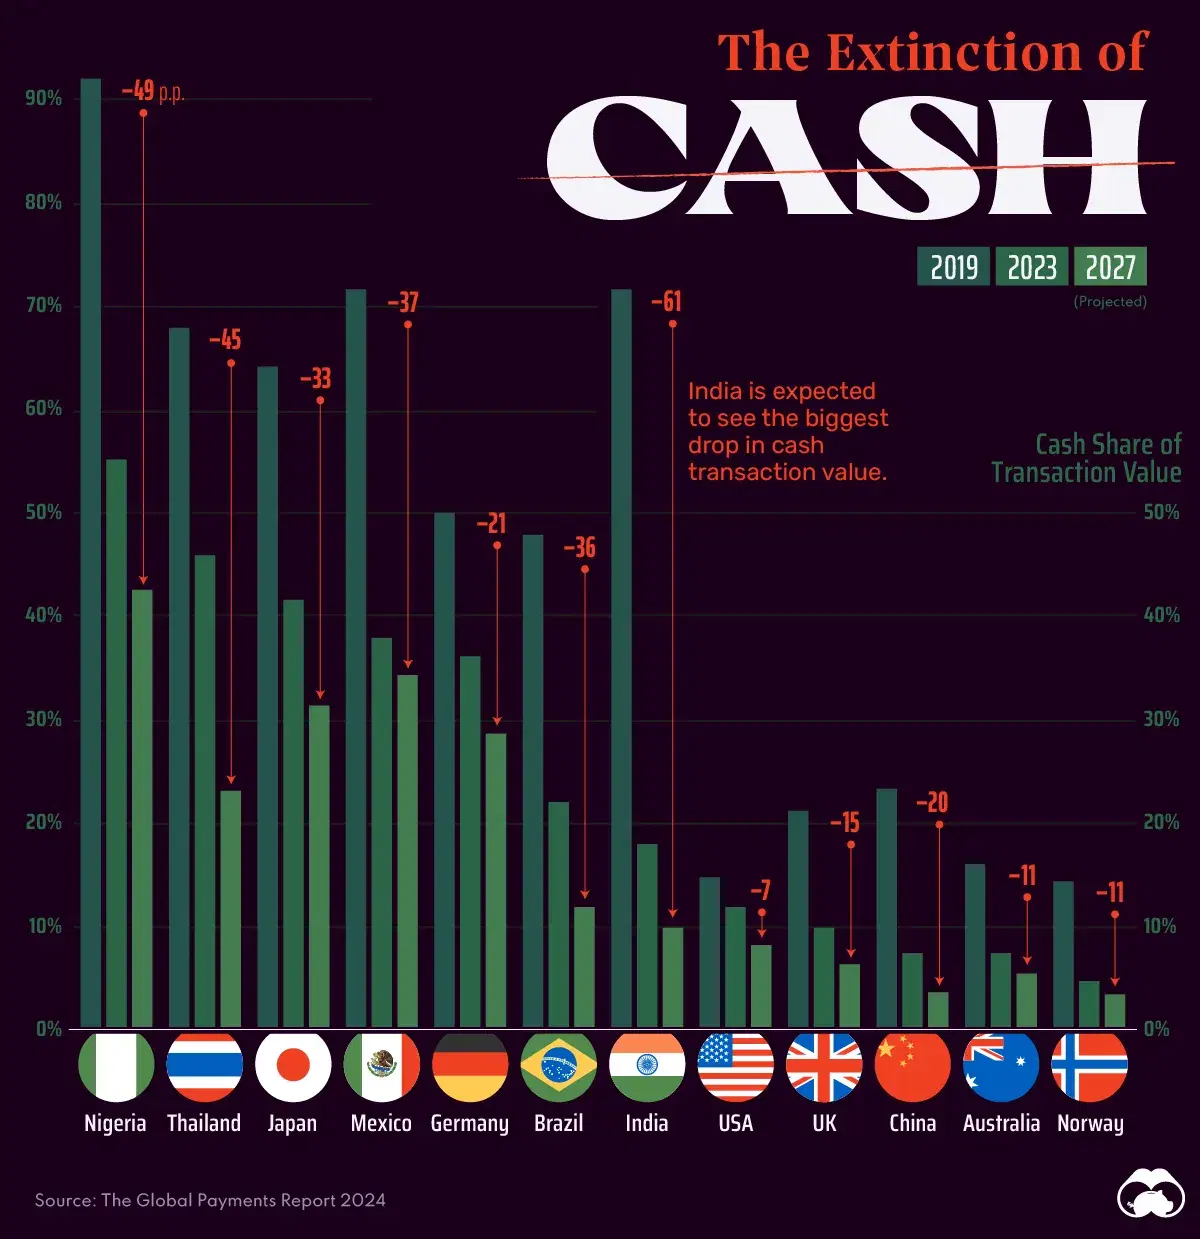 Cash Transactions are Becoming More Rare Around the World